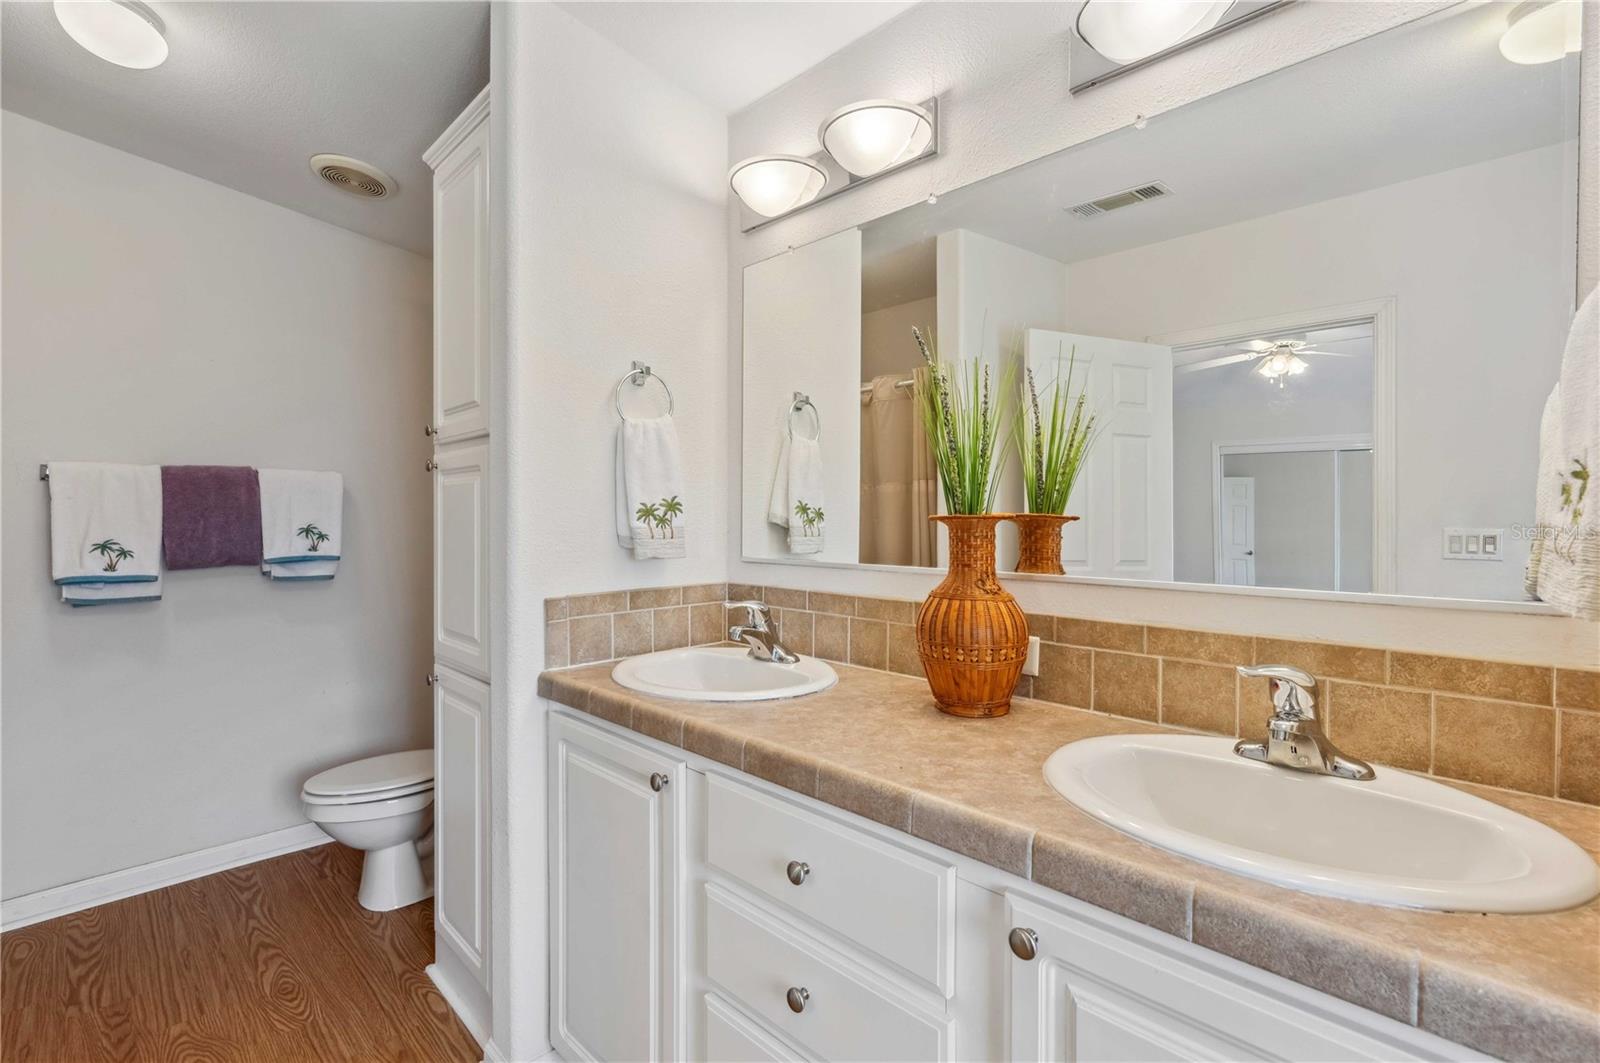 Primary retreat has double vanity, step-in shower, laminate flooring, and extra stoarge.